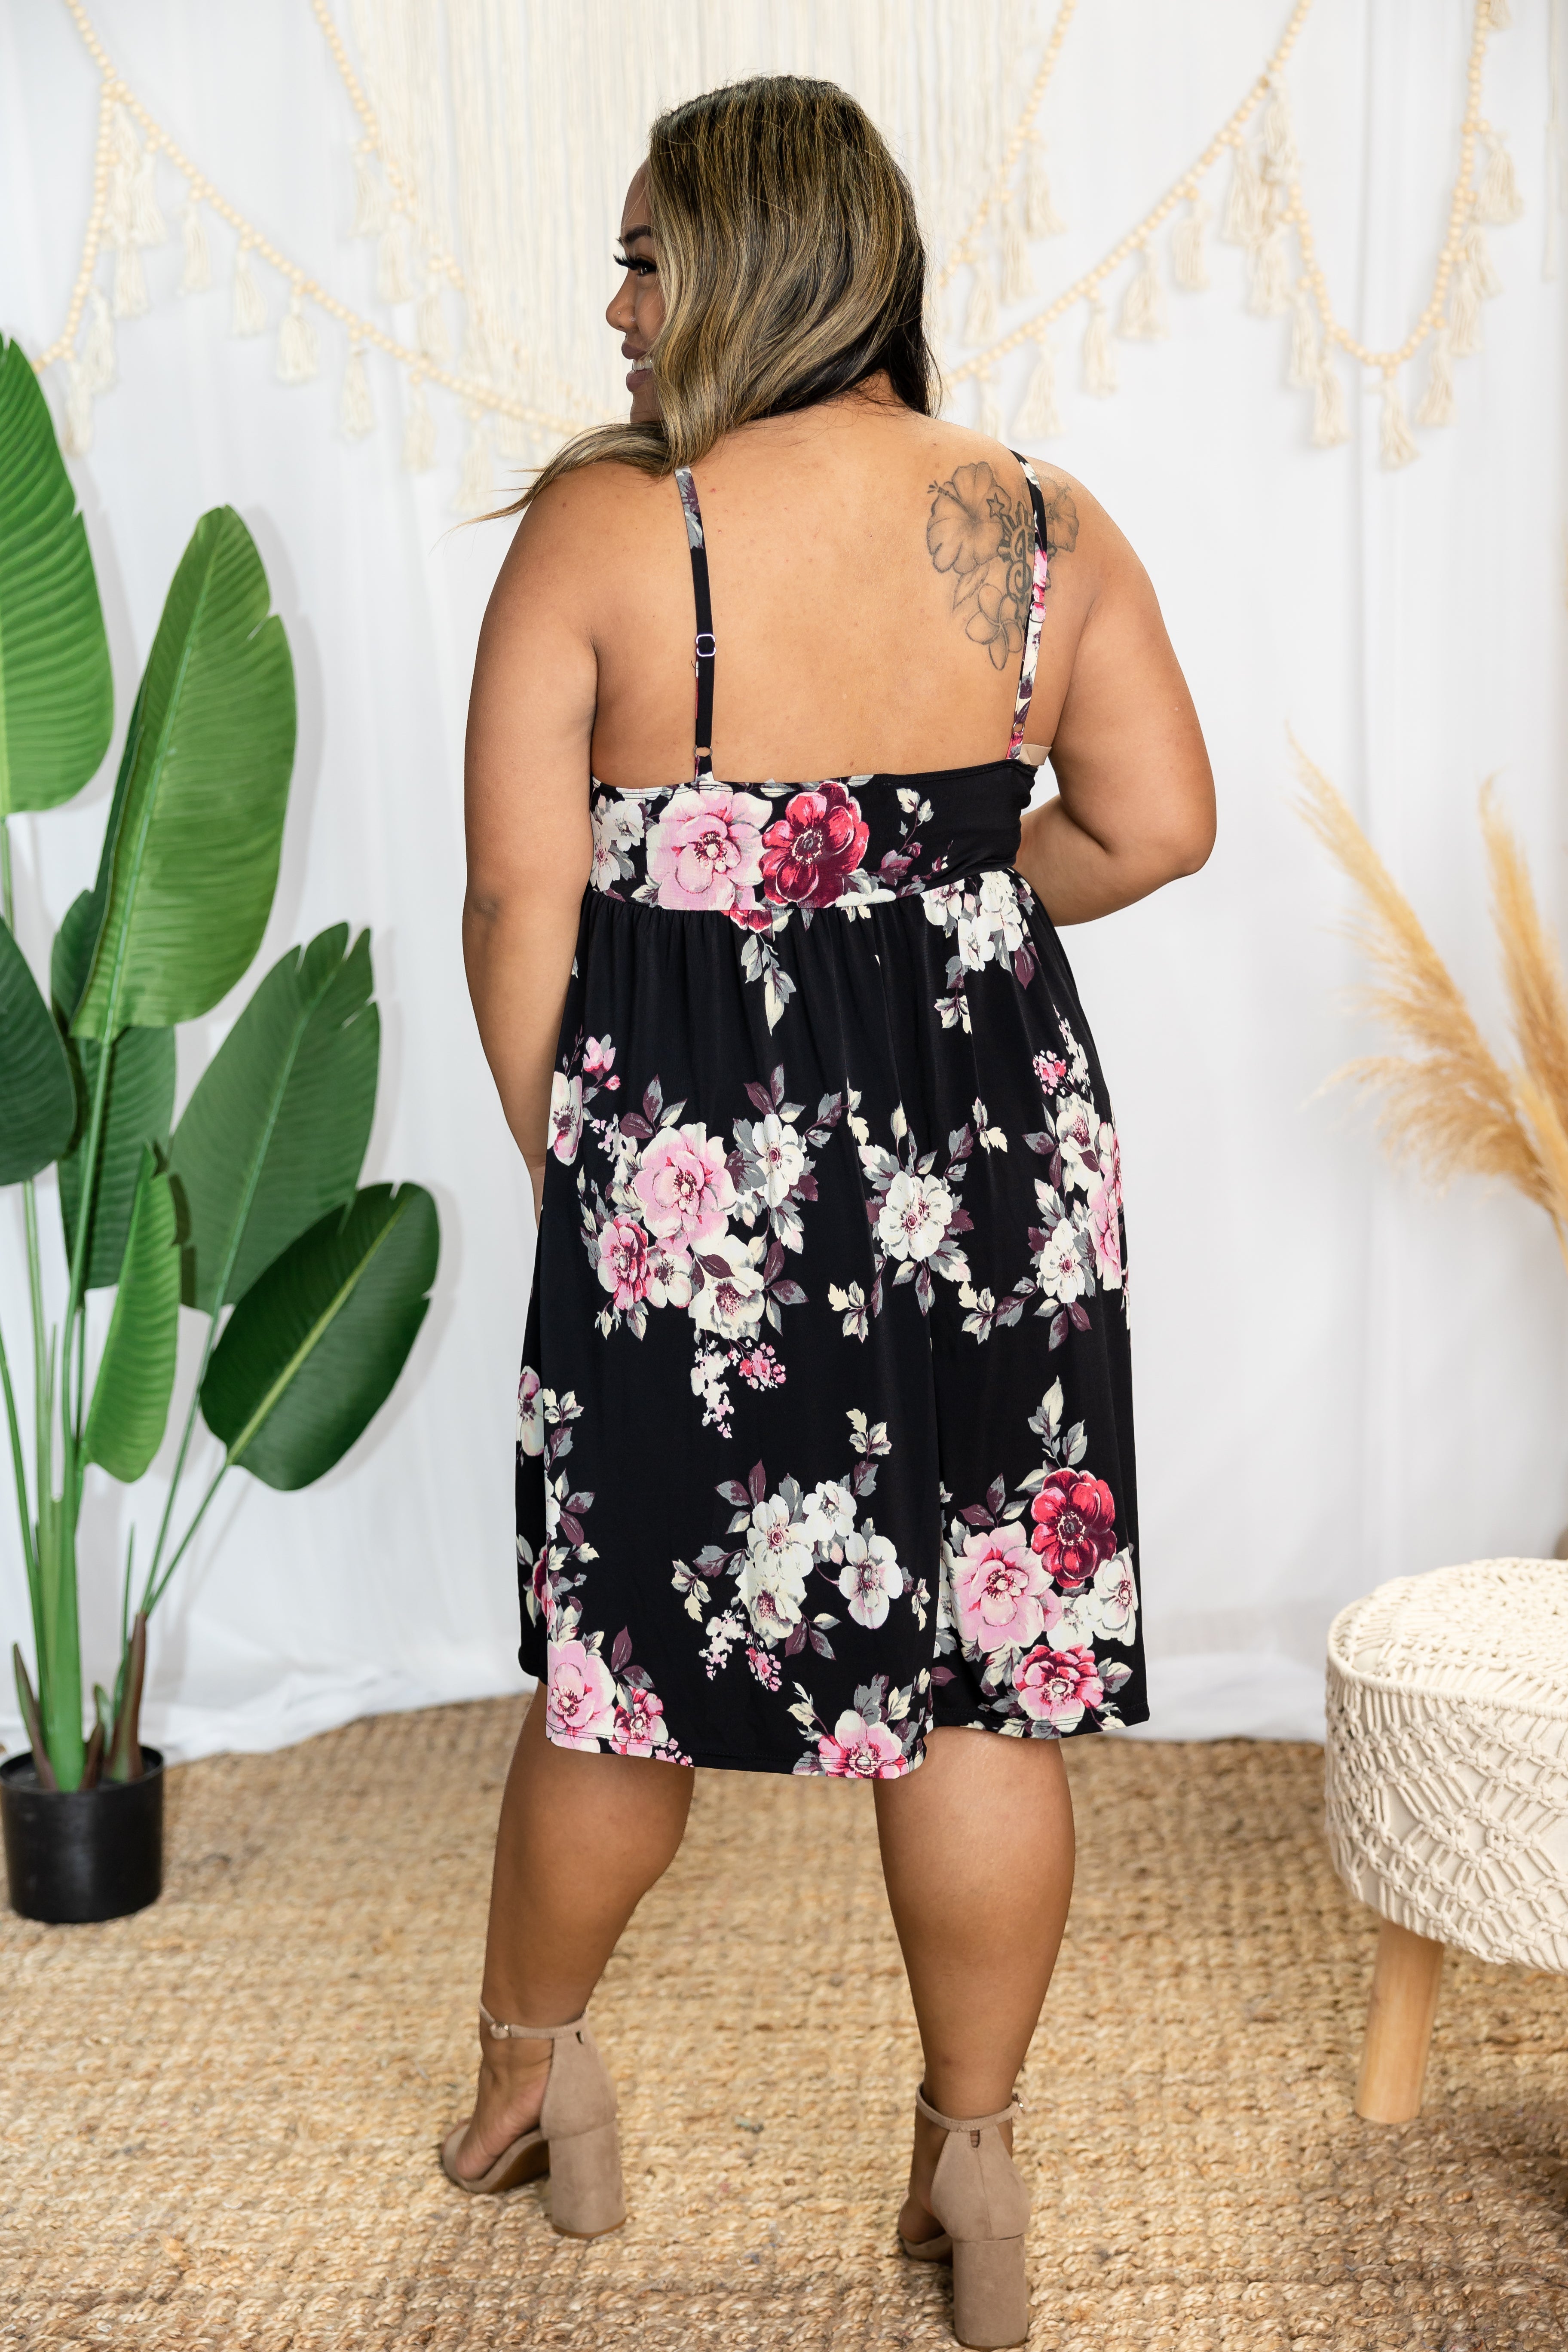 White Birch I'm The One Floral Dress Boutique Simplified